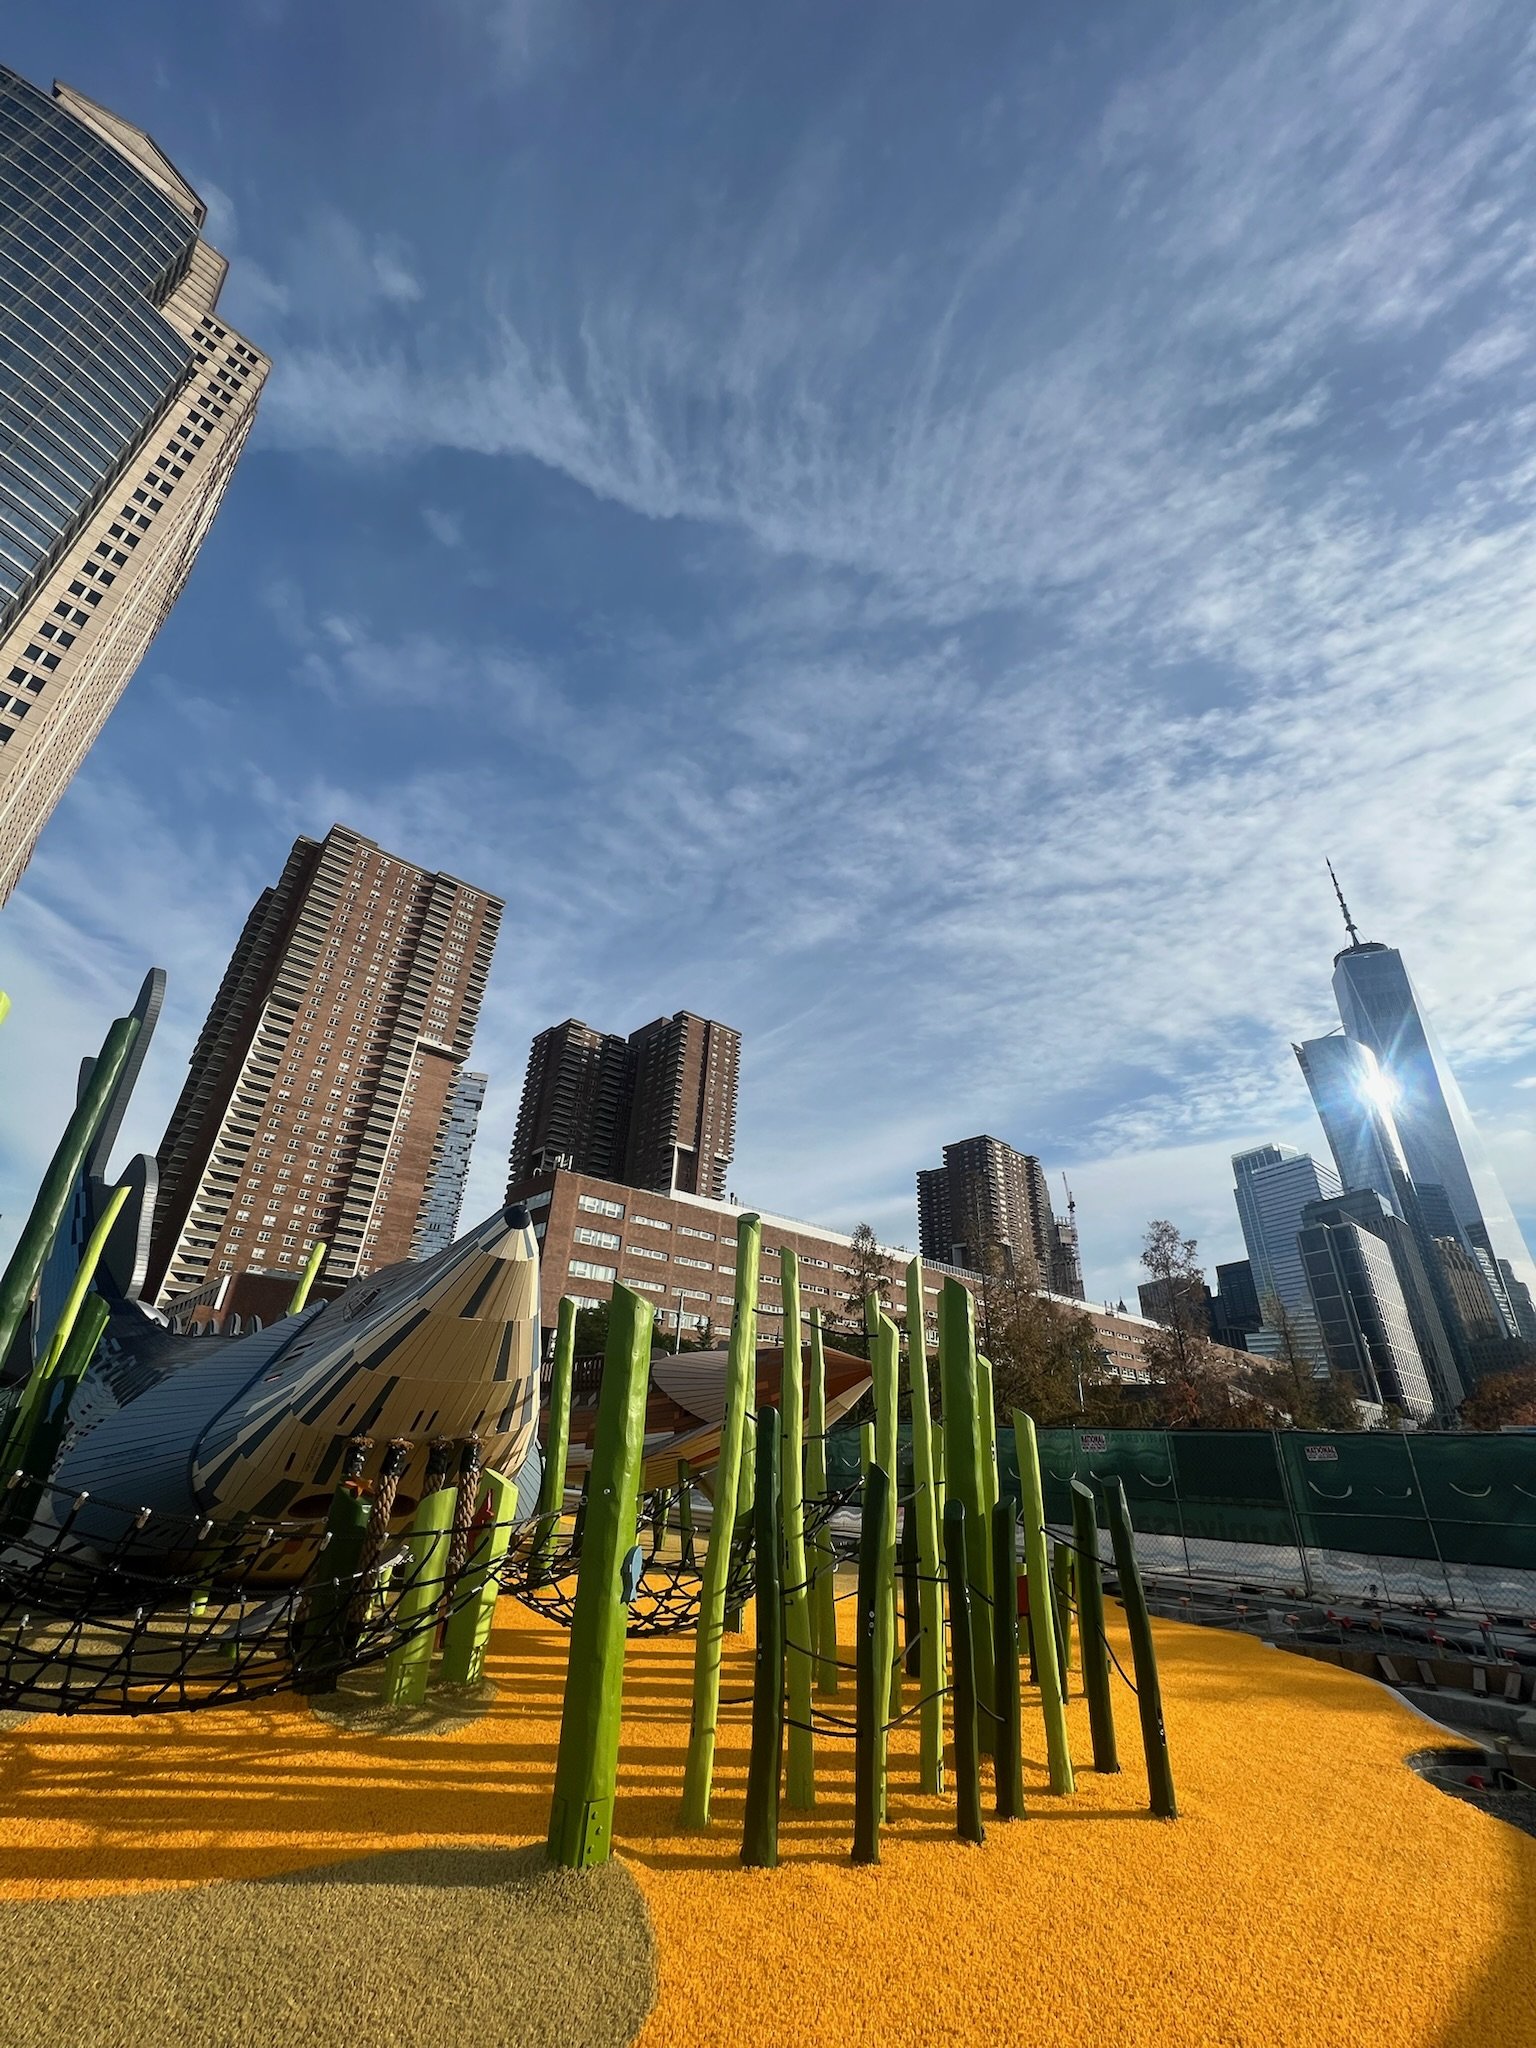 an image of artificial turf at a playground in New York City